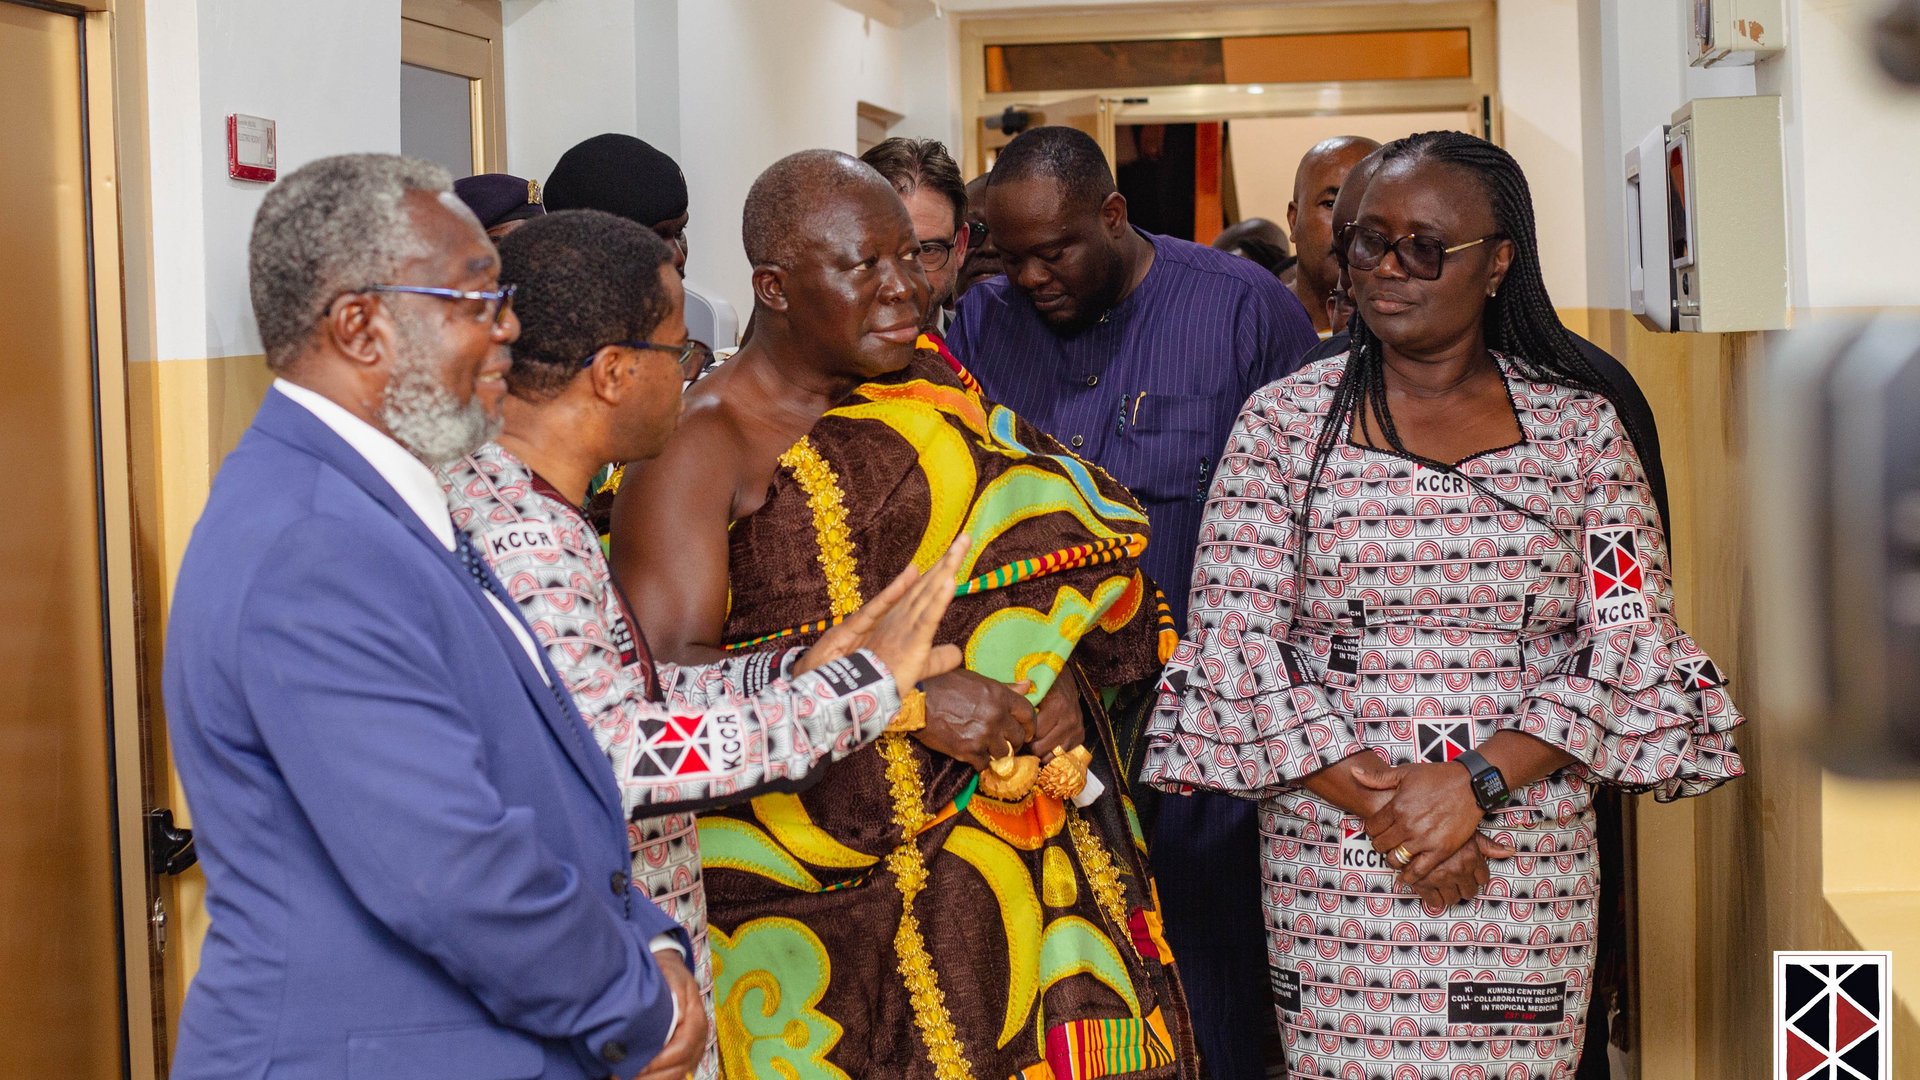 The photo shows the King and Chancellor of the University, the Vice Chancellor of the University, the Scientific Director of KCCR and the Health Policy Advisor to the President of Ghana standing in the corridor of the new building.